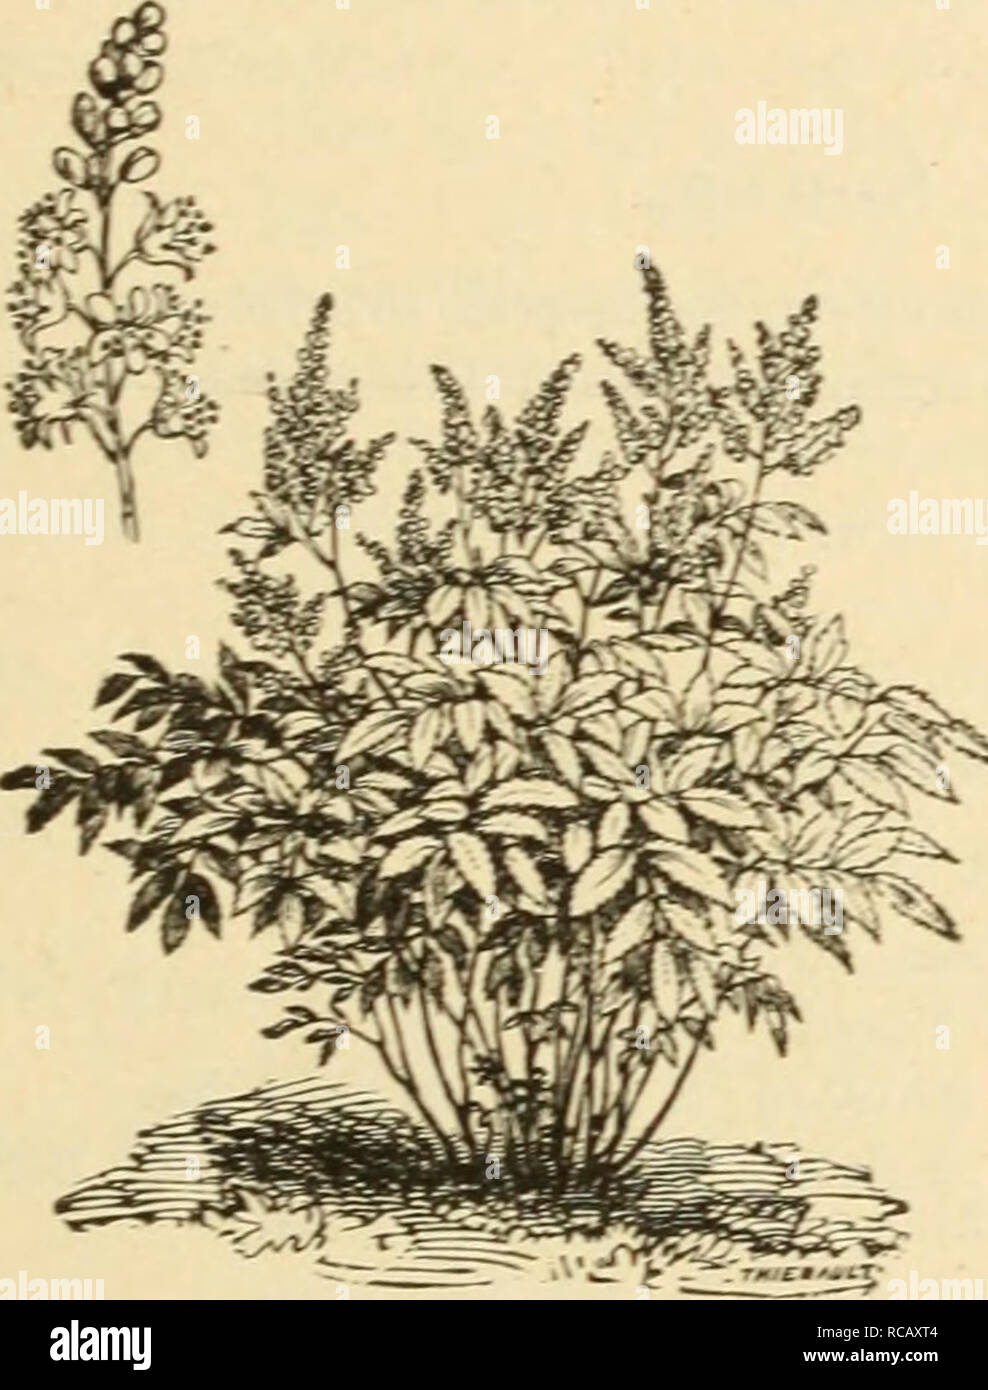 . Ellwanger &amp; Barry's supplementary catalogue novelties, etc. : 1898. GENERAL CATALOGUE. 117 ASTILBE. Japan Spiraea. A. Japonica. Known generally as SfAnxa Japonica or Hoteia Japonica. A handsome plant, -with small, pure white flowers, in larg-e, branching- panicles. Blooms in May, in the open air, but is cultivated chiefly for forcing- in winder. dt)c. var. grandiflora. (Xew.) Compared with the type, the individual flowers are much more numerotis. and the flower spikes are larger, borne more freely and are more compact. See cut. 50c. AUBRETIA. Purple Rock-Cress. Valuable rock-plants. A. d Stock Photo